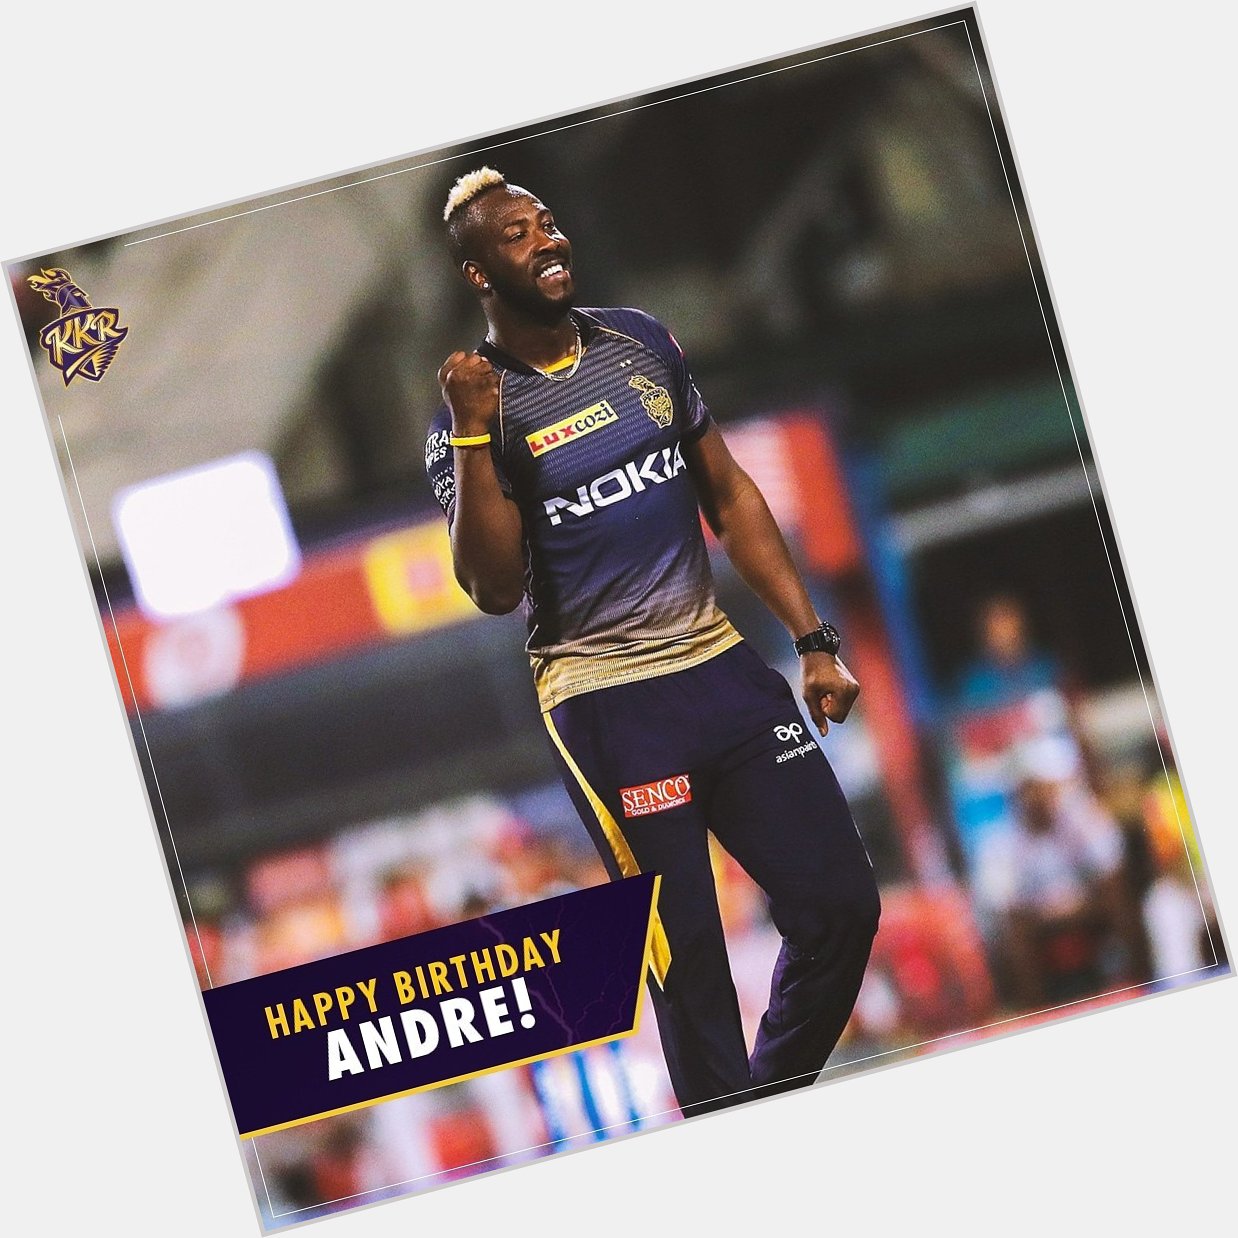 Happy birthday Andre Russell .you are also playing outstanding in KKR team, specially last night 